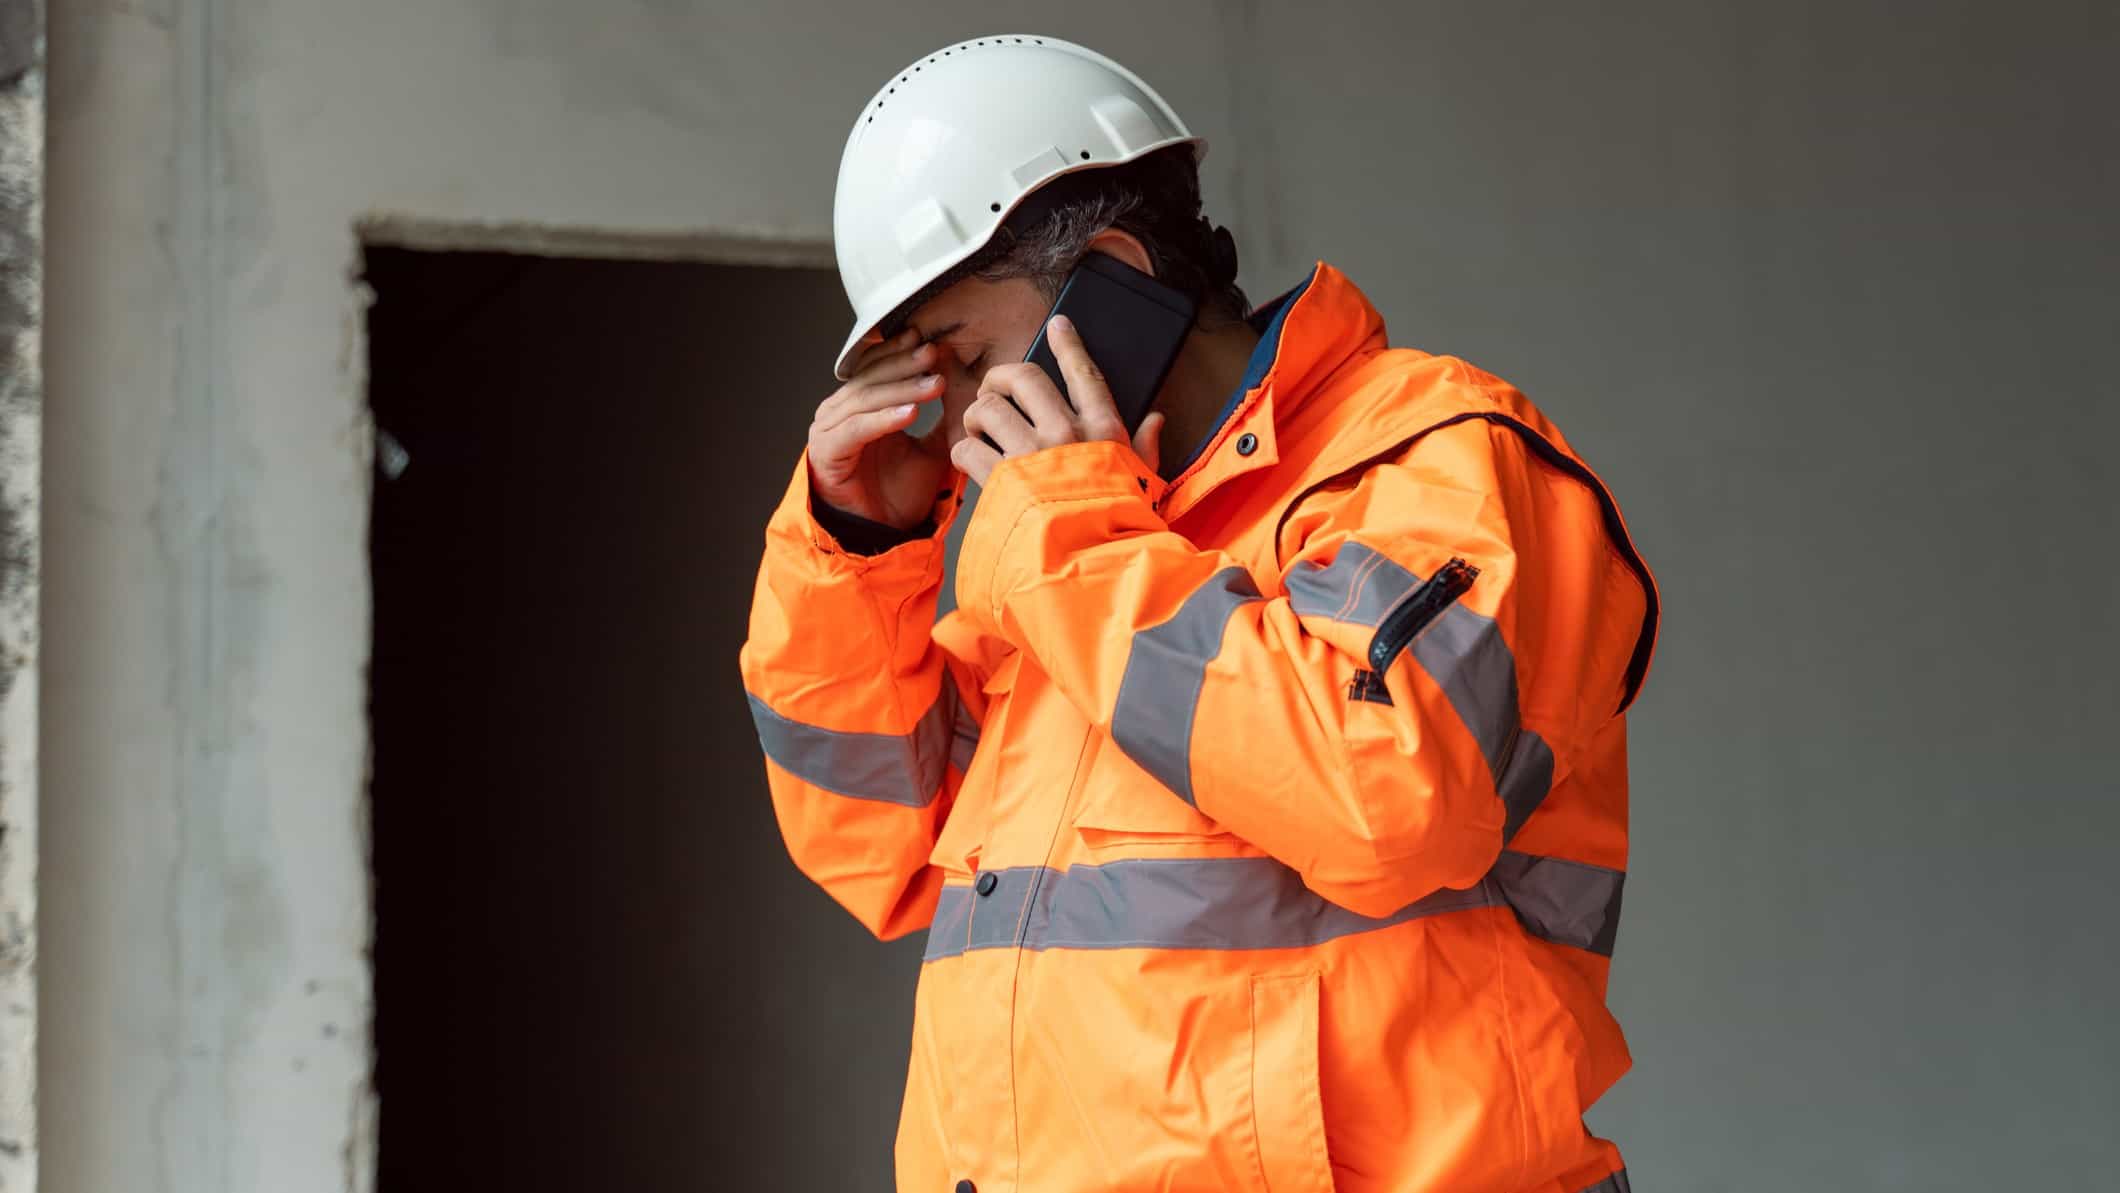 a sad looking engineer or miner wearing a high visibility jacket and a hard hat stands alone with his head bowed and hand to his forehead as he speaks on a mobile telephone out front of what appears to be an on site work shed.